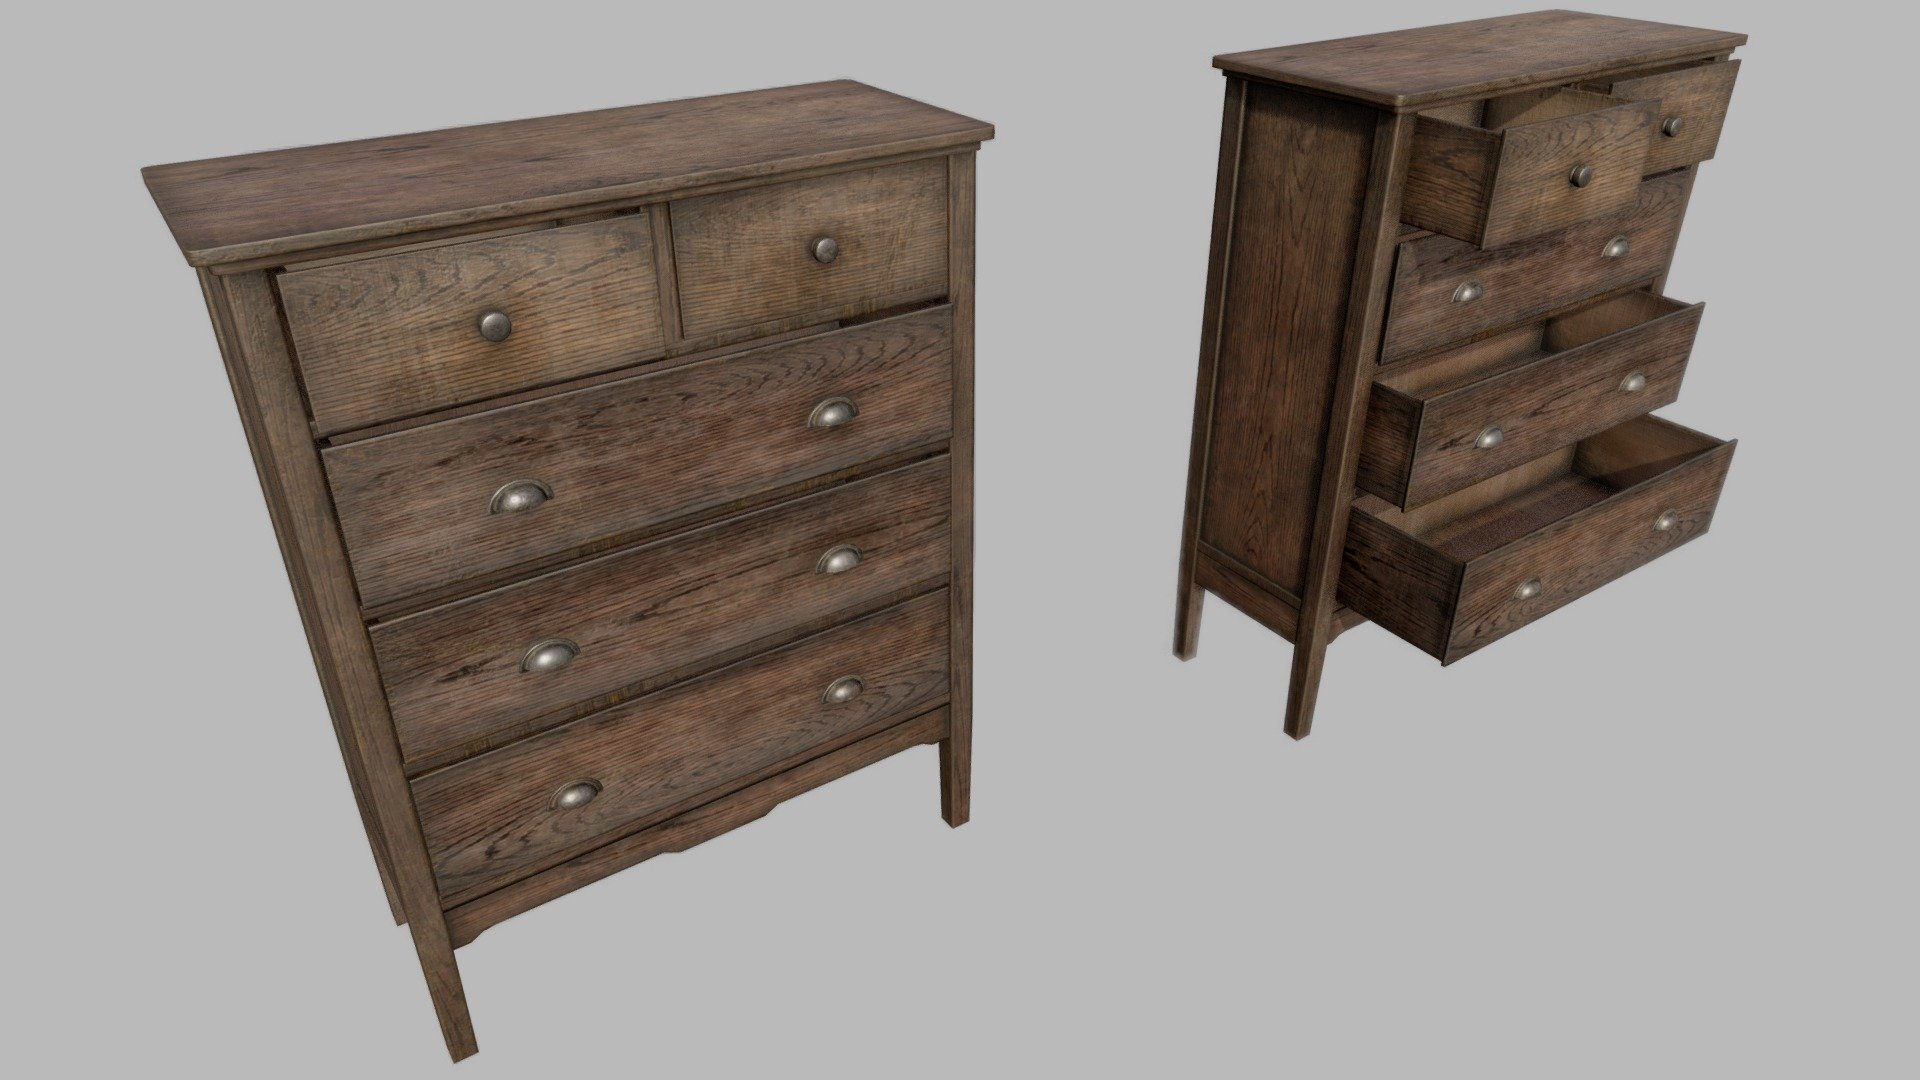 Large Wooden Dresser A PBR

Very Detailed Low Poly Large Old Wooden Dresser with High-Quality PBR Texturing. 

Fits perfect for any PBR game as Decoration etc. like Post Apocalyptic Environment or Horror Games for example

The Drawers are separated so that they can be opened.

Created with 3DSMAX, Zbrush and Substance Painter.

Standard Textures
Base Color, Metallic, Roughness, Height, AO, Normal, Maps

Unreal 4 Textures
Base Color, Normal, OcclusionRoughnessMetallic

Unity 5/2017 Textures
Albedo, SpecularSmoothness, Normal, and AO Maps

2x4096x4096 TGA Textures

Please Note, this PBR Textures Only. 

Low Poly Triangles 

2310 Tris
1348 Verts

File Formats :

.Max2018
.Max2017
.Max2016
.Max2015
.FBX
.OBJ
.3DS
.DAE - Large Wooden Dresser A PBR - Buy Royalty Free 3D model by GamePoly (@triix3d) 3d model